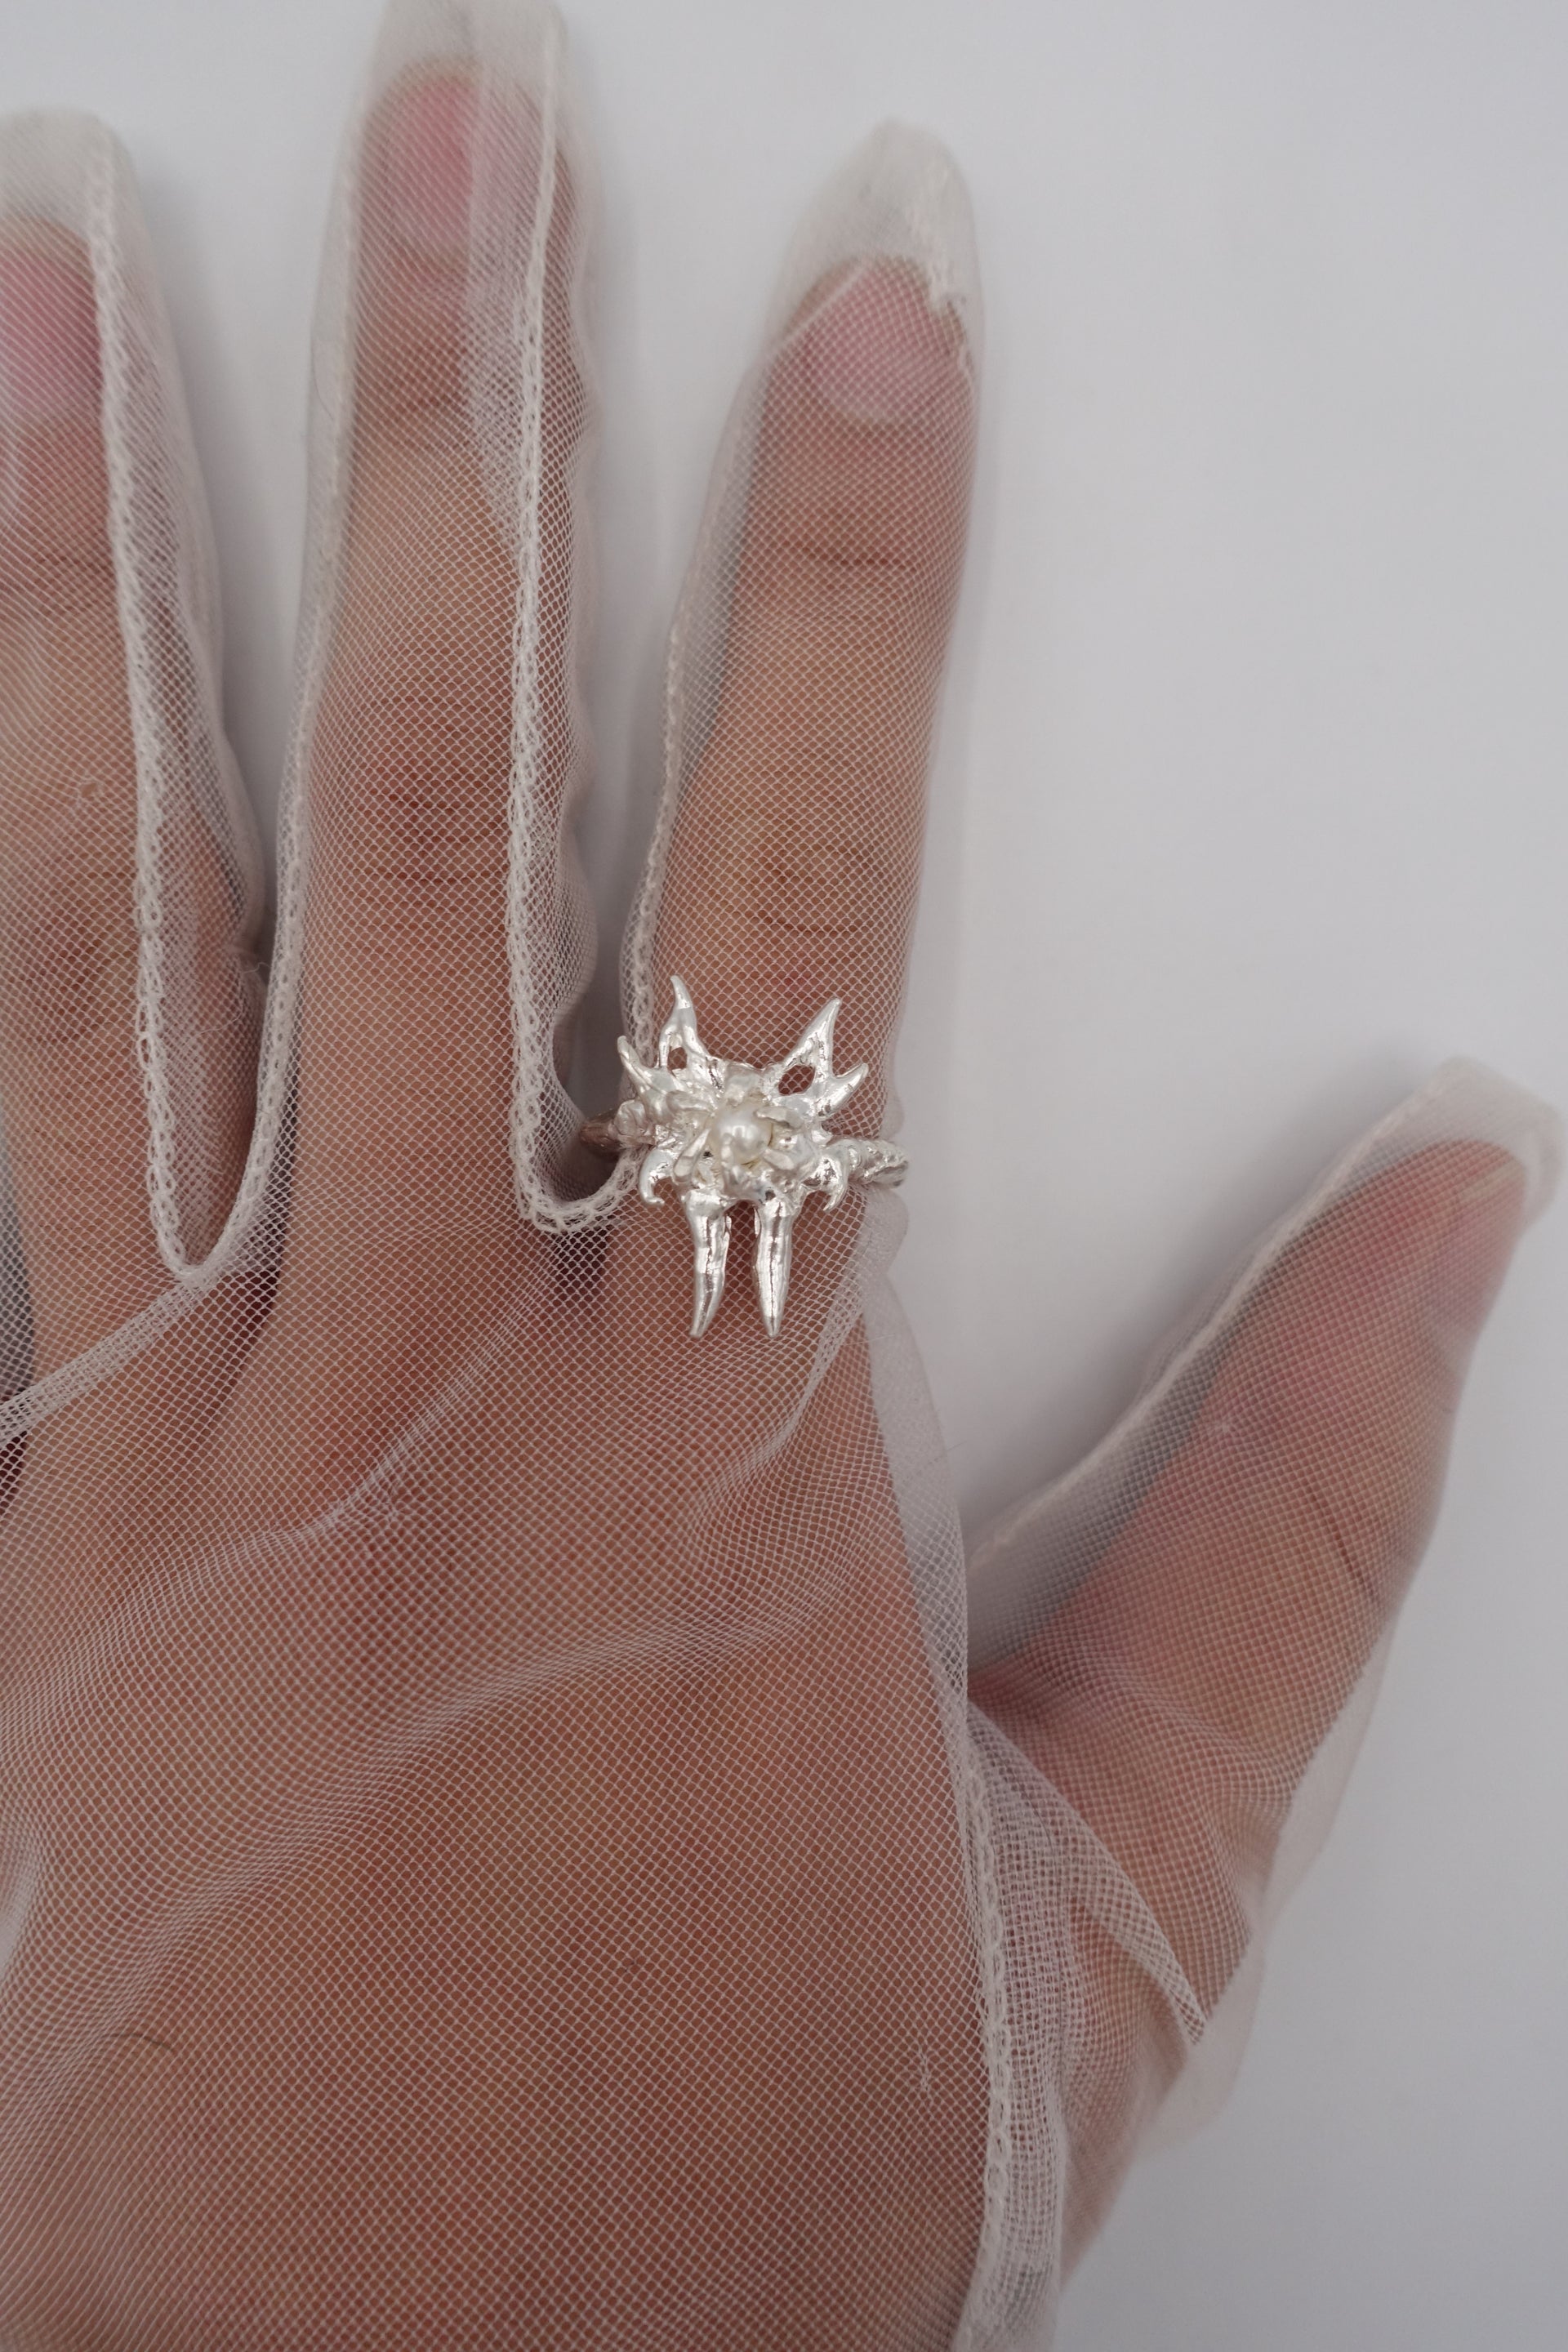 MINI PEARL BUTTERFLY RING